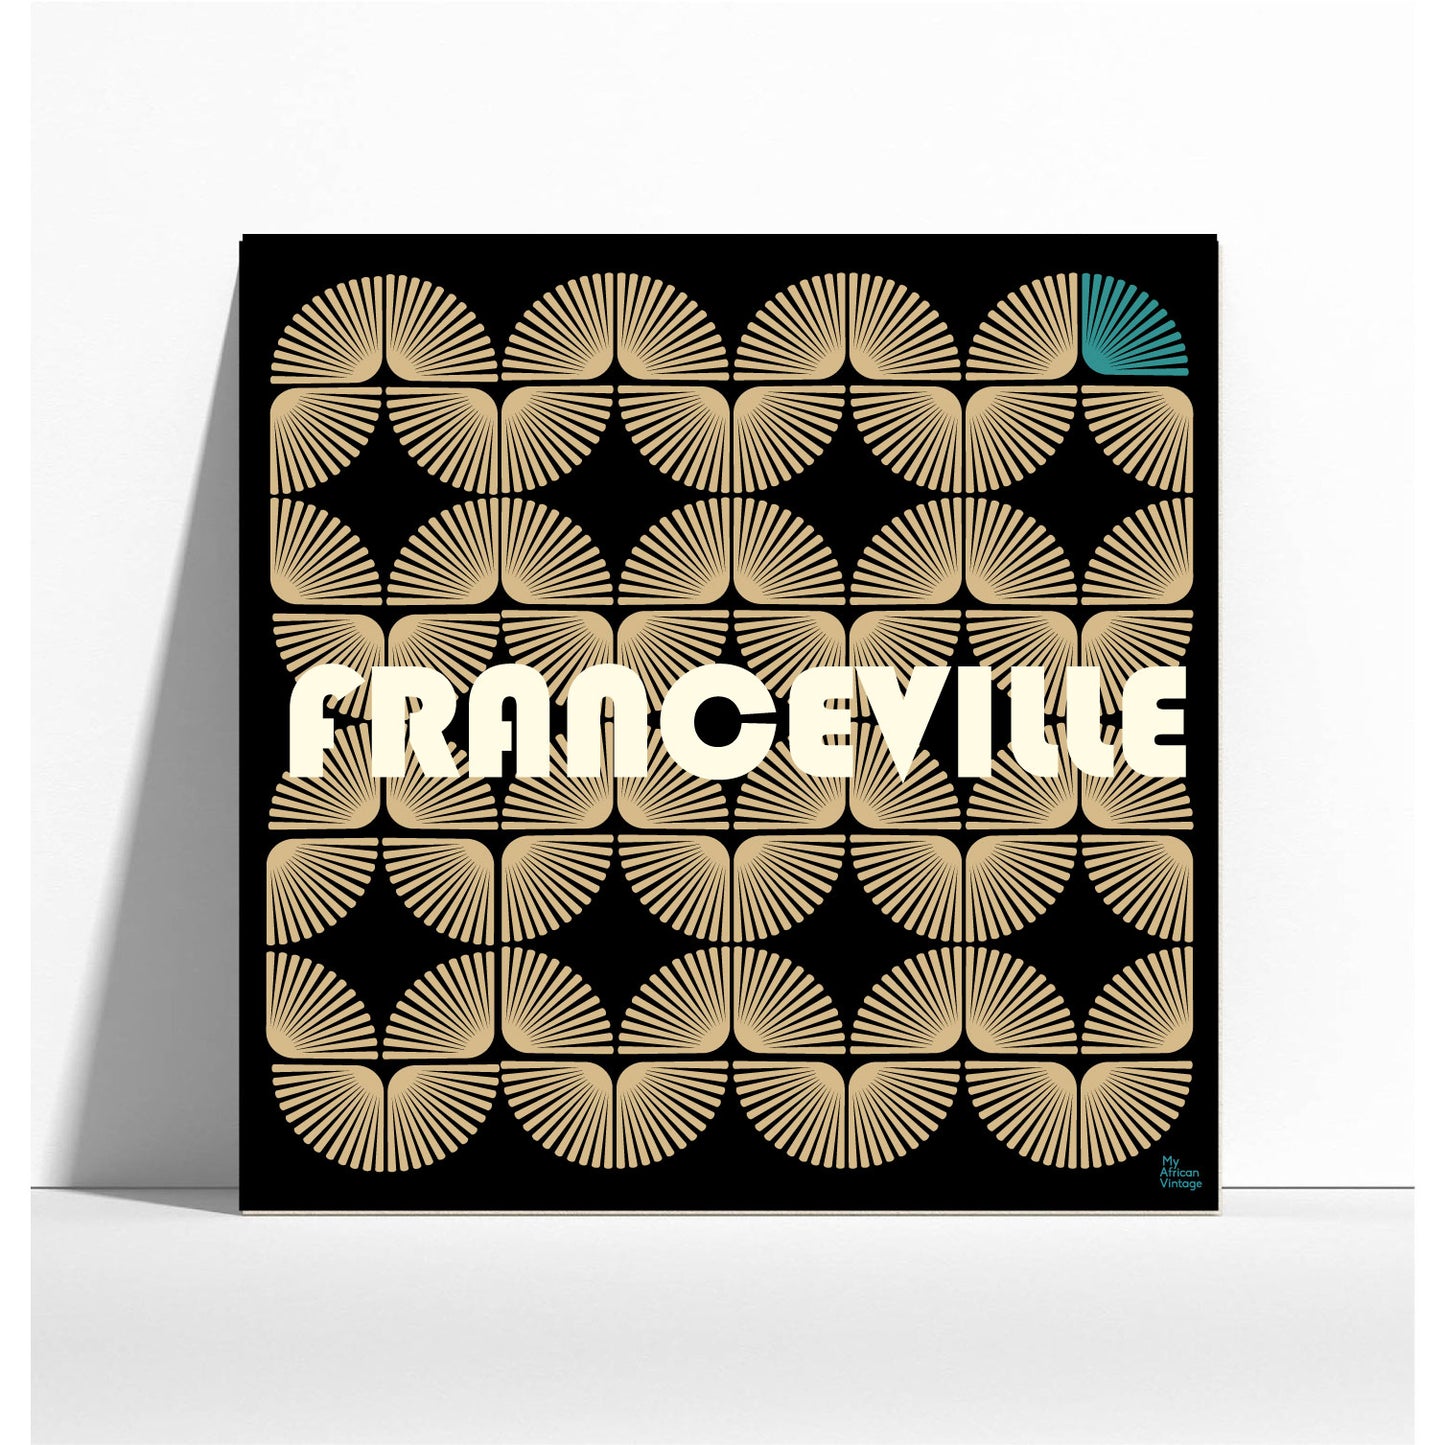 "Franceville" retro style poster - "My African Vintage" collection